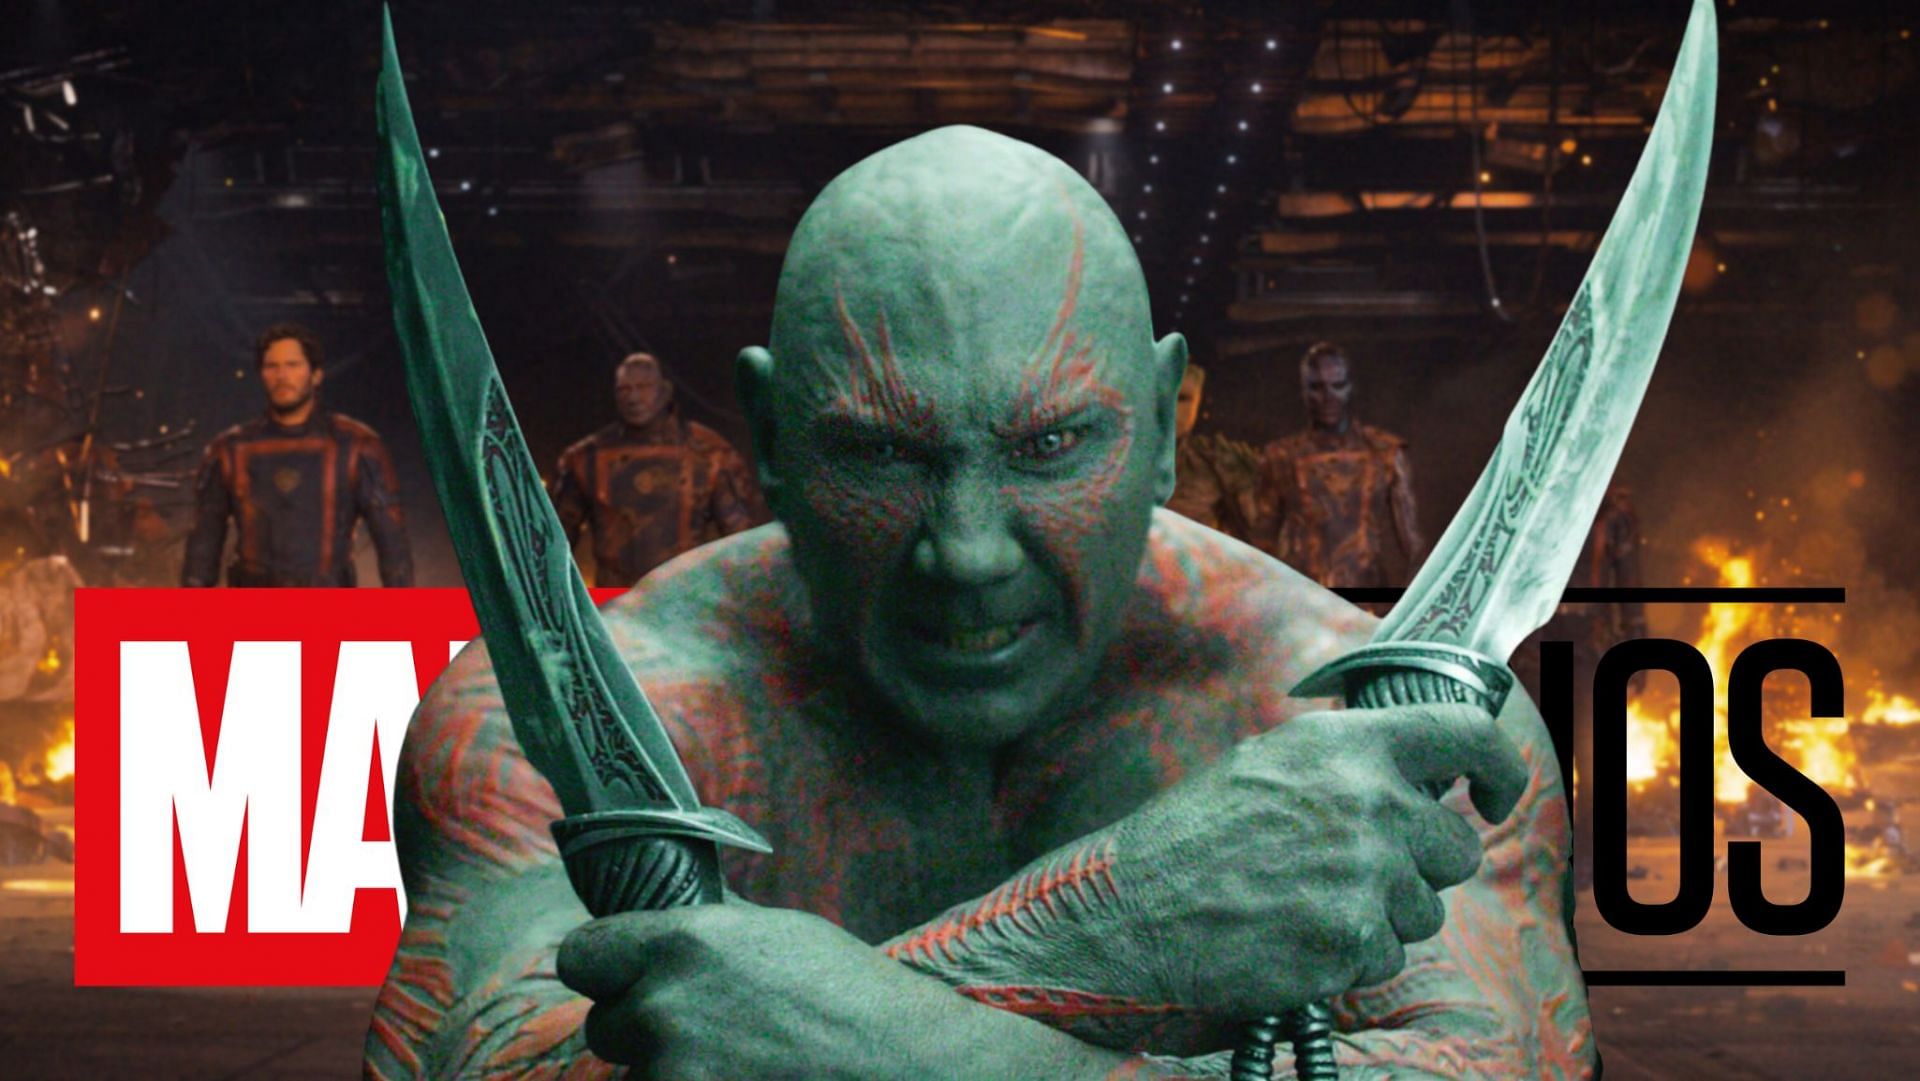 Drax star Dave Bautista teases fans with the possibility of thrilling MCU cameos in Guardians of the Galaxy Vol. 3 (Image via Sportskeeda)